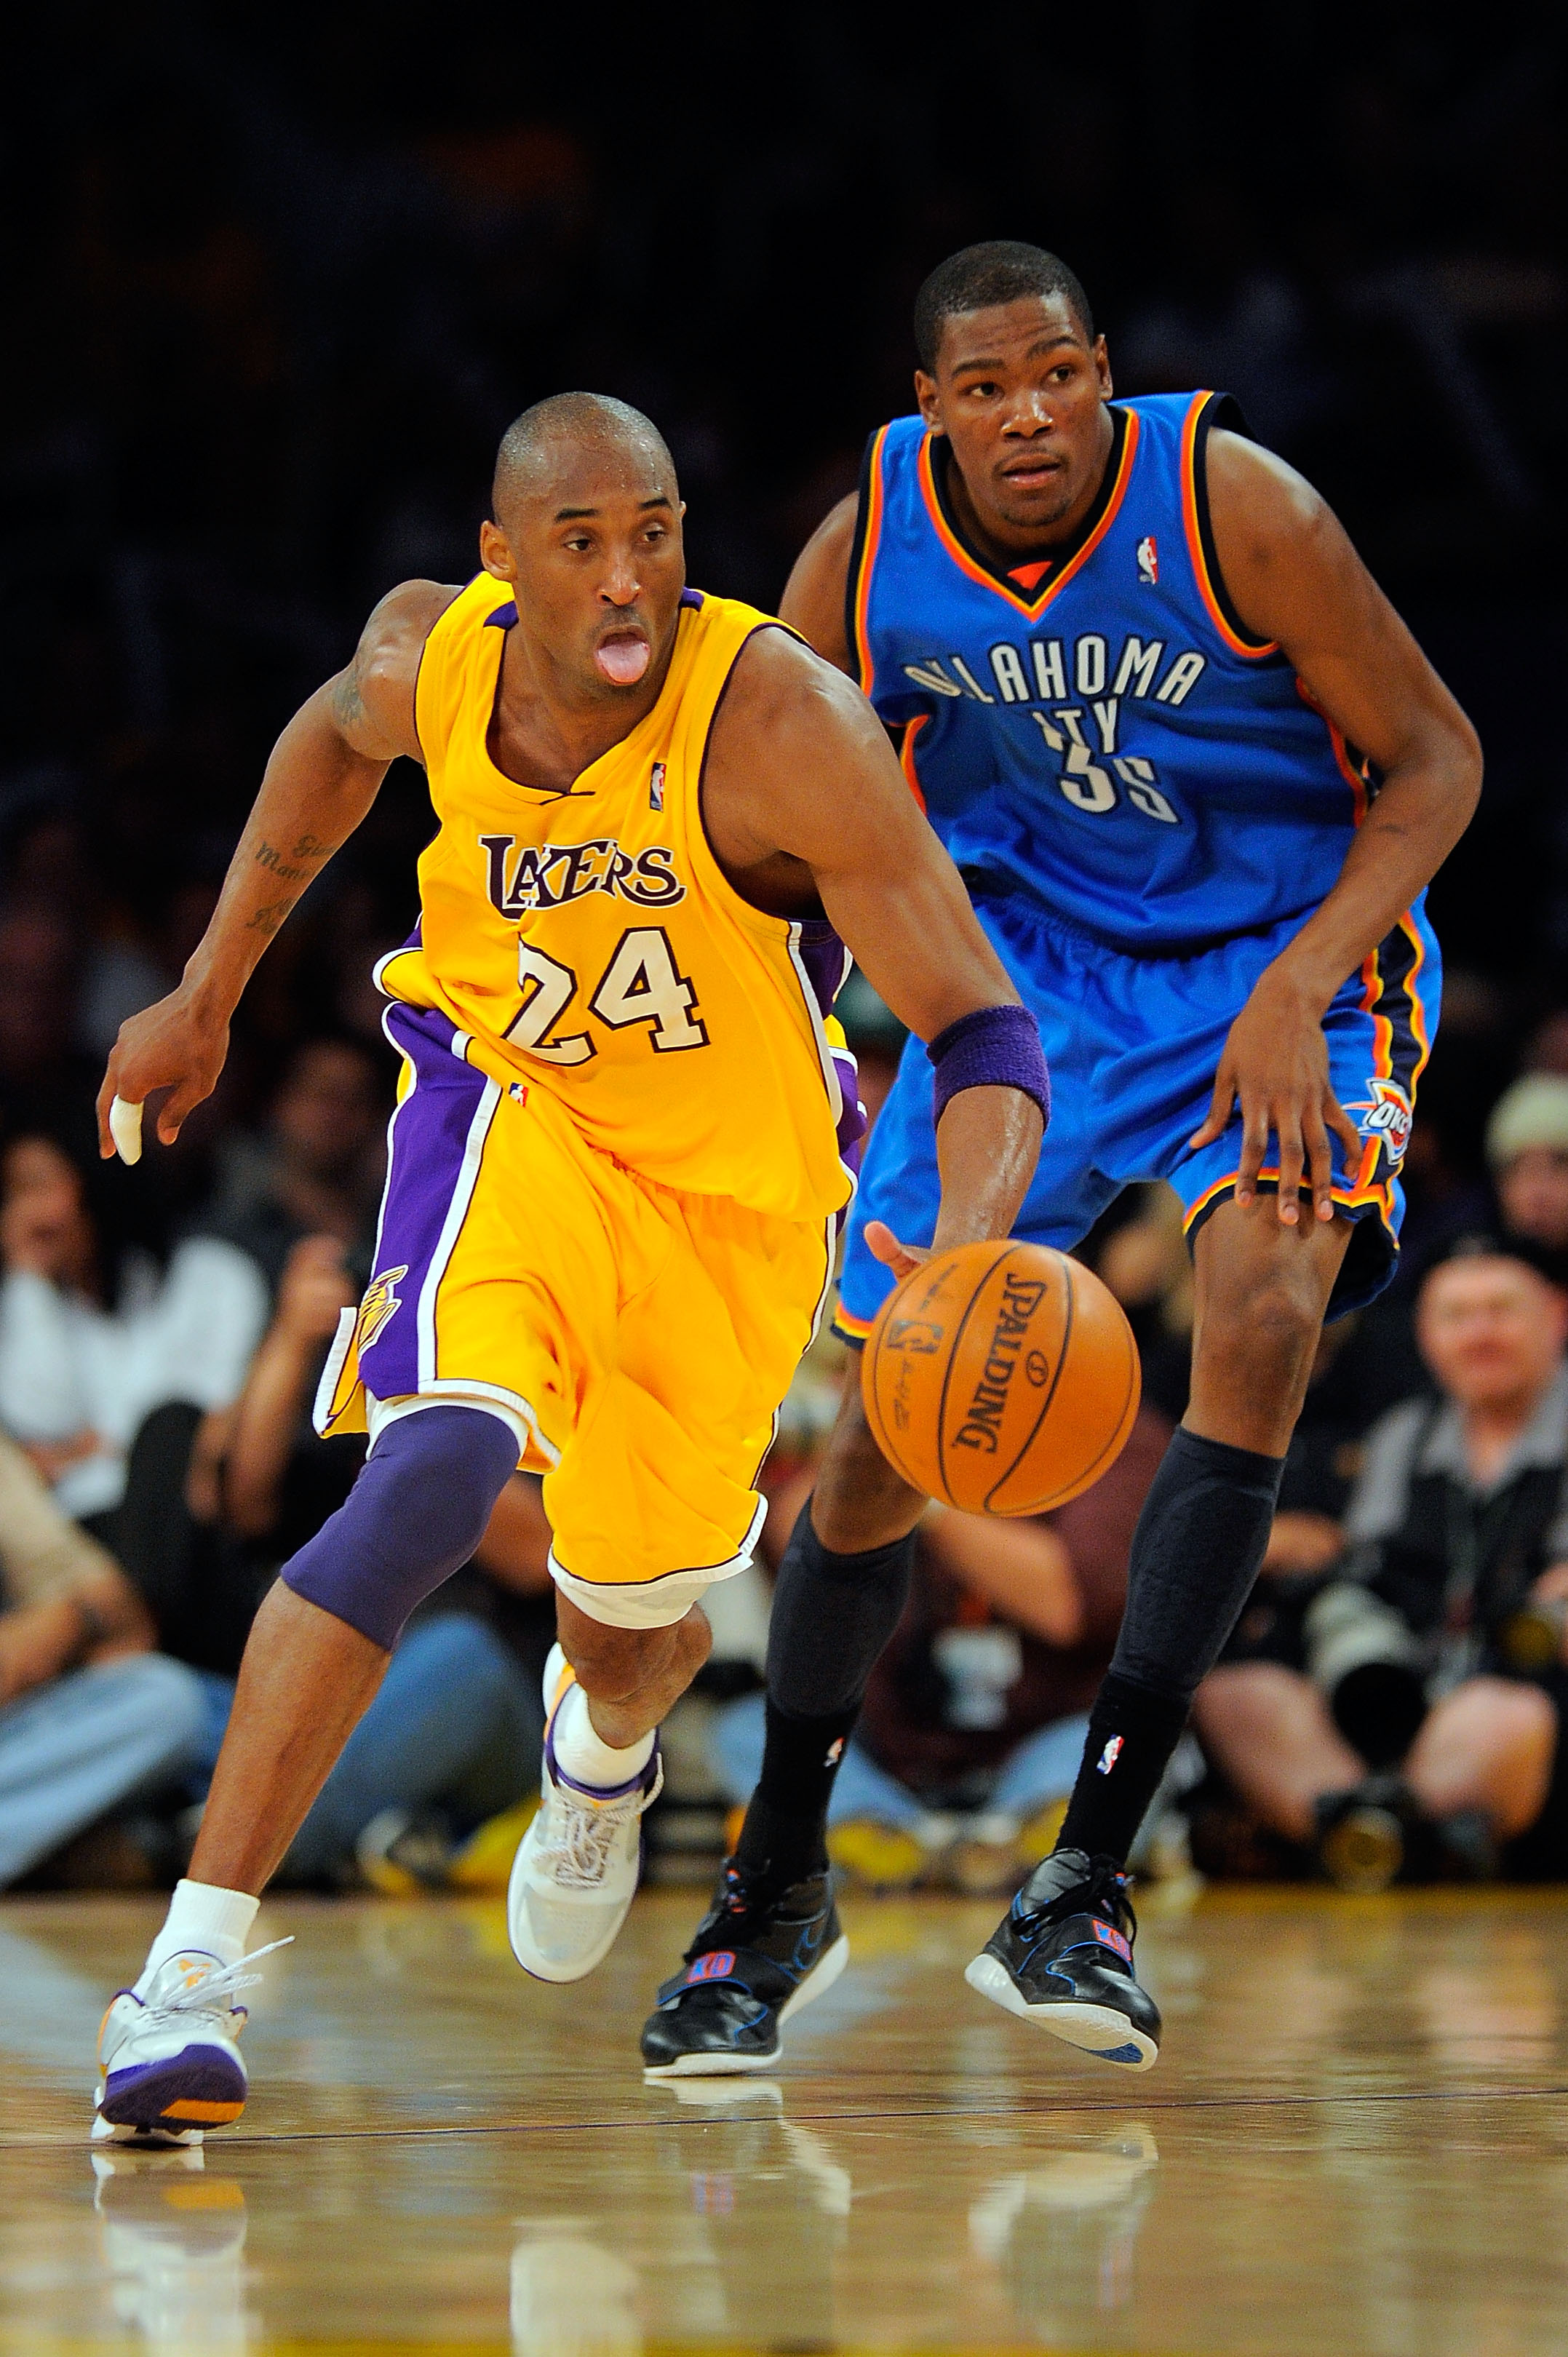 Fisher hopes Kobe will stay in L.A. for backcourt reunion